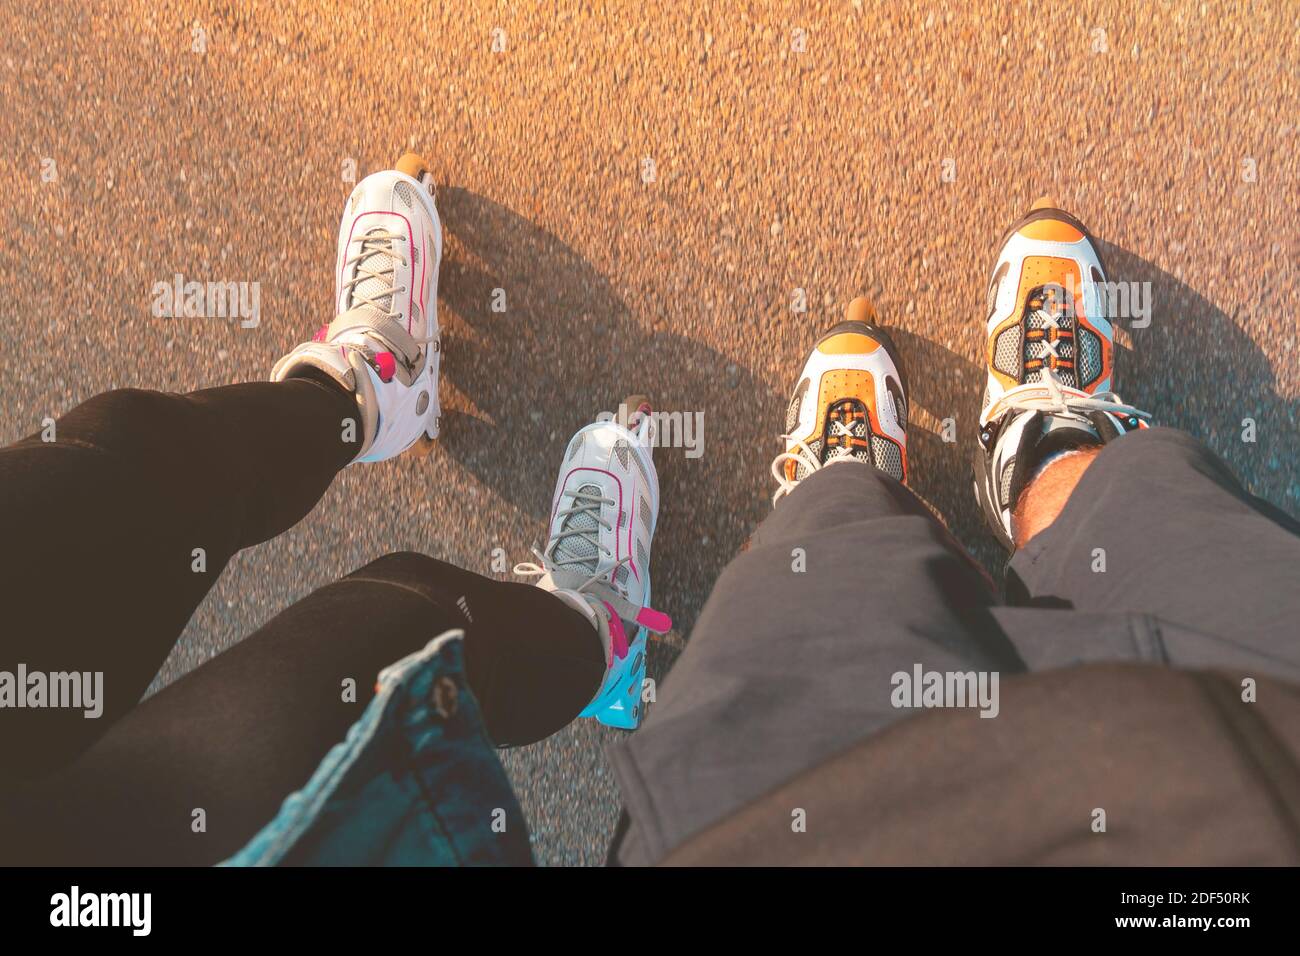 Top view of legs with inline skates. Boy and girl on roller skates. Place for text. Stock Photo